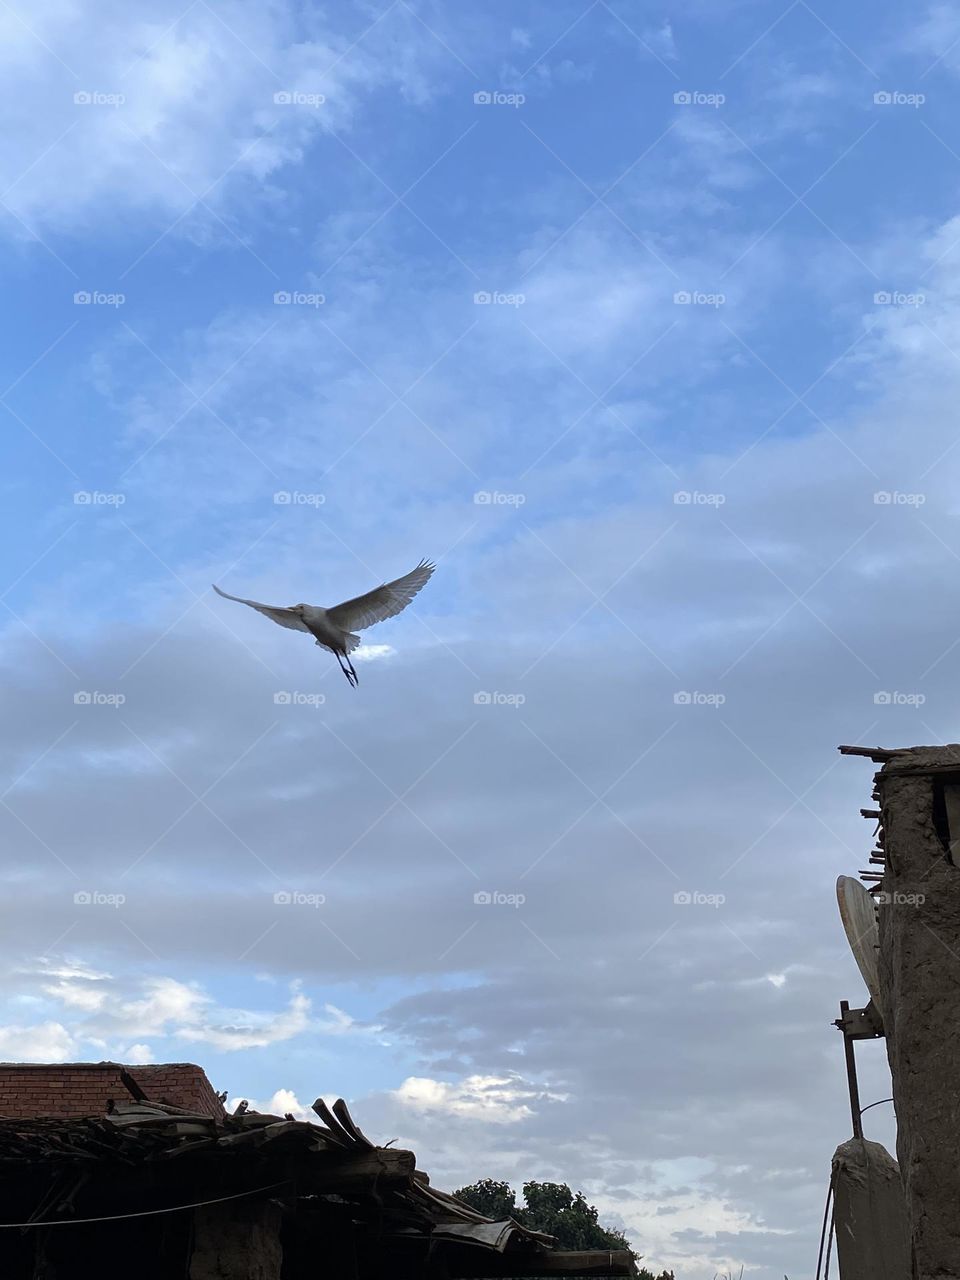 A bird flying in the cloudy sky 